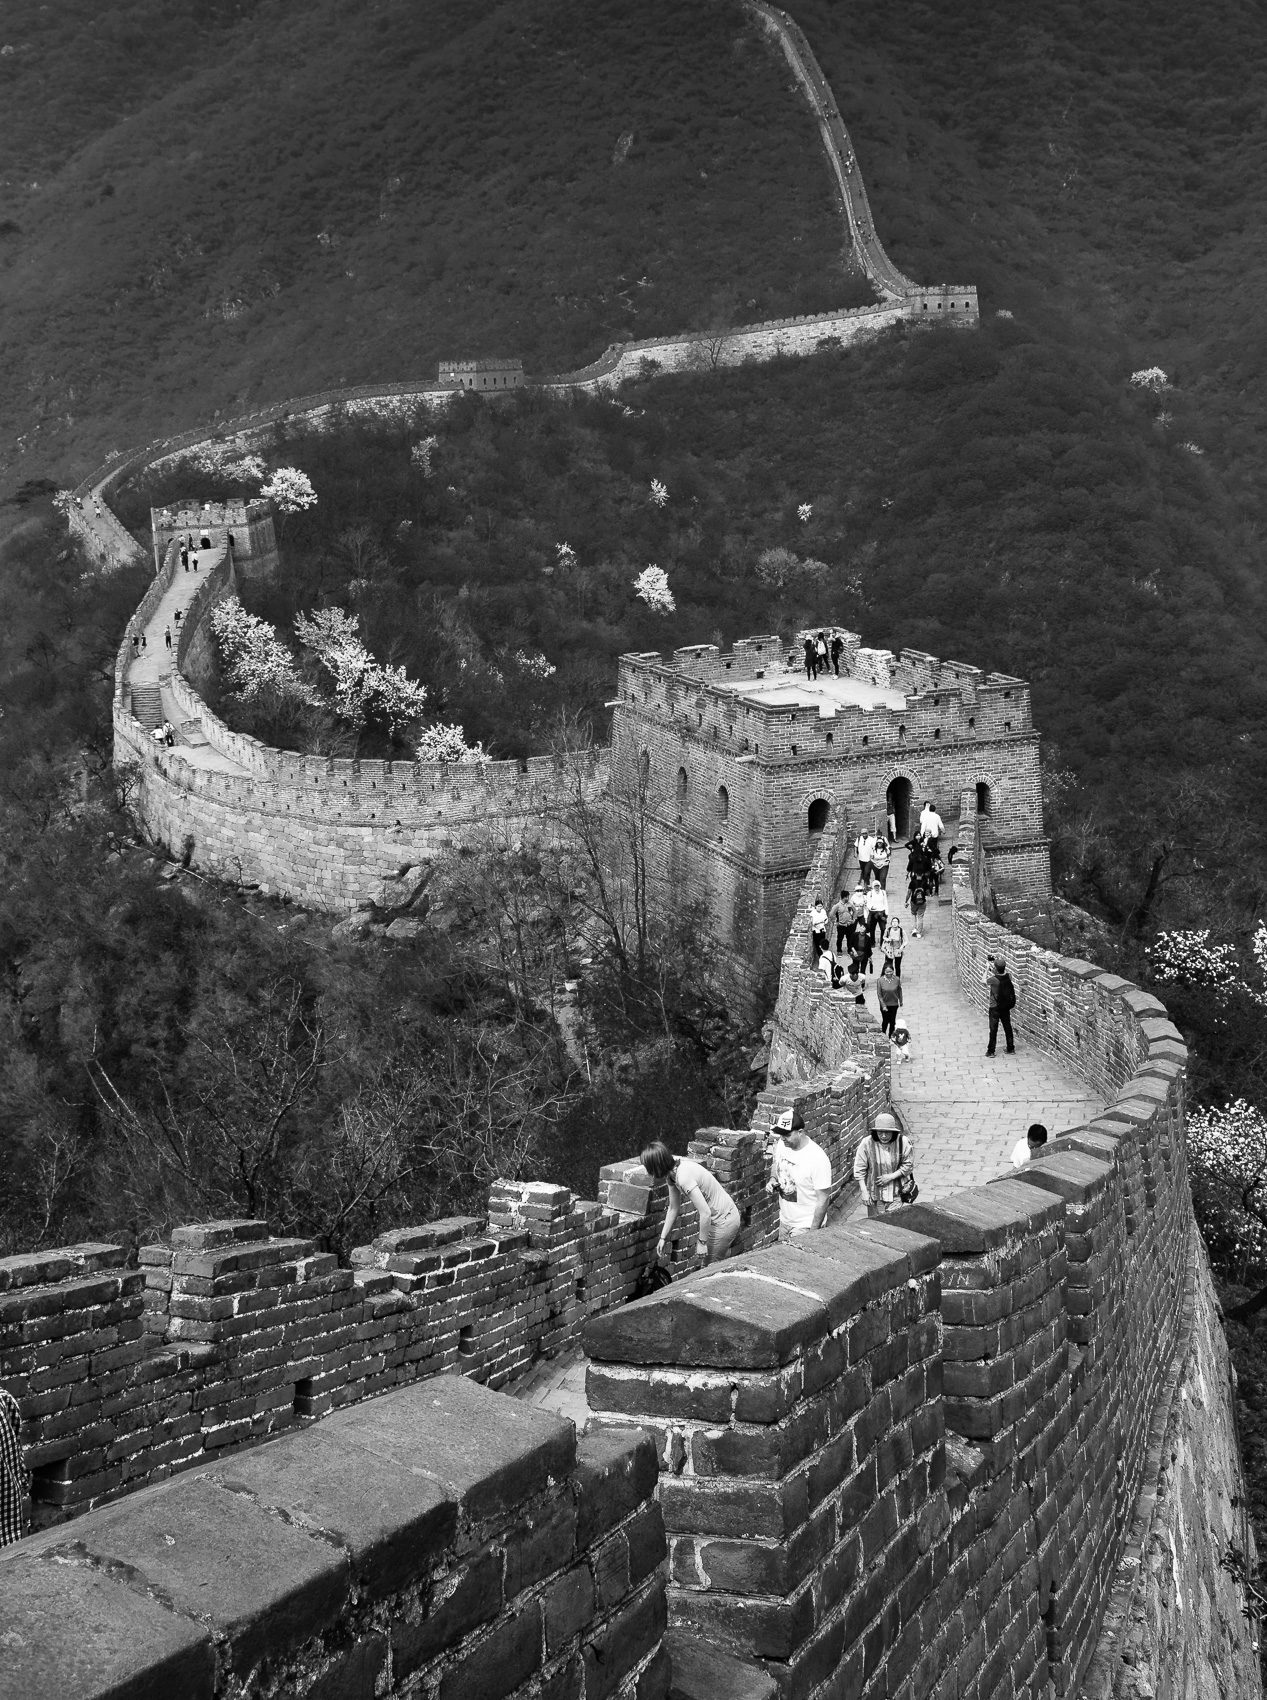 The Great Wall of China at Mutianyu, near Beijing. ZM008